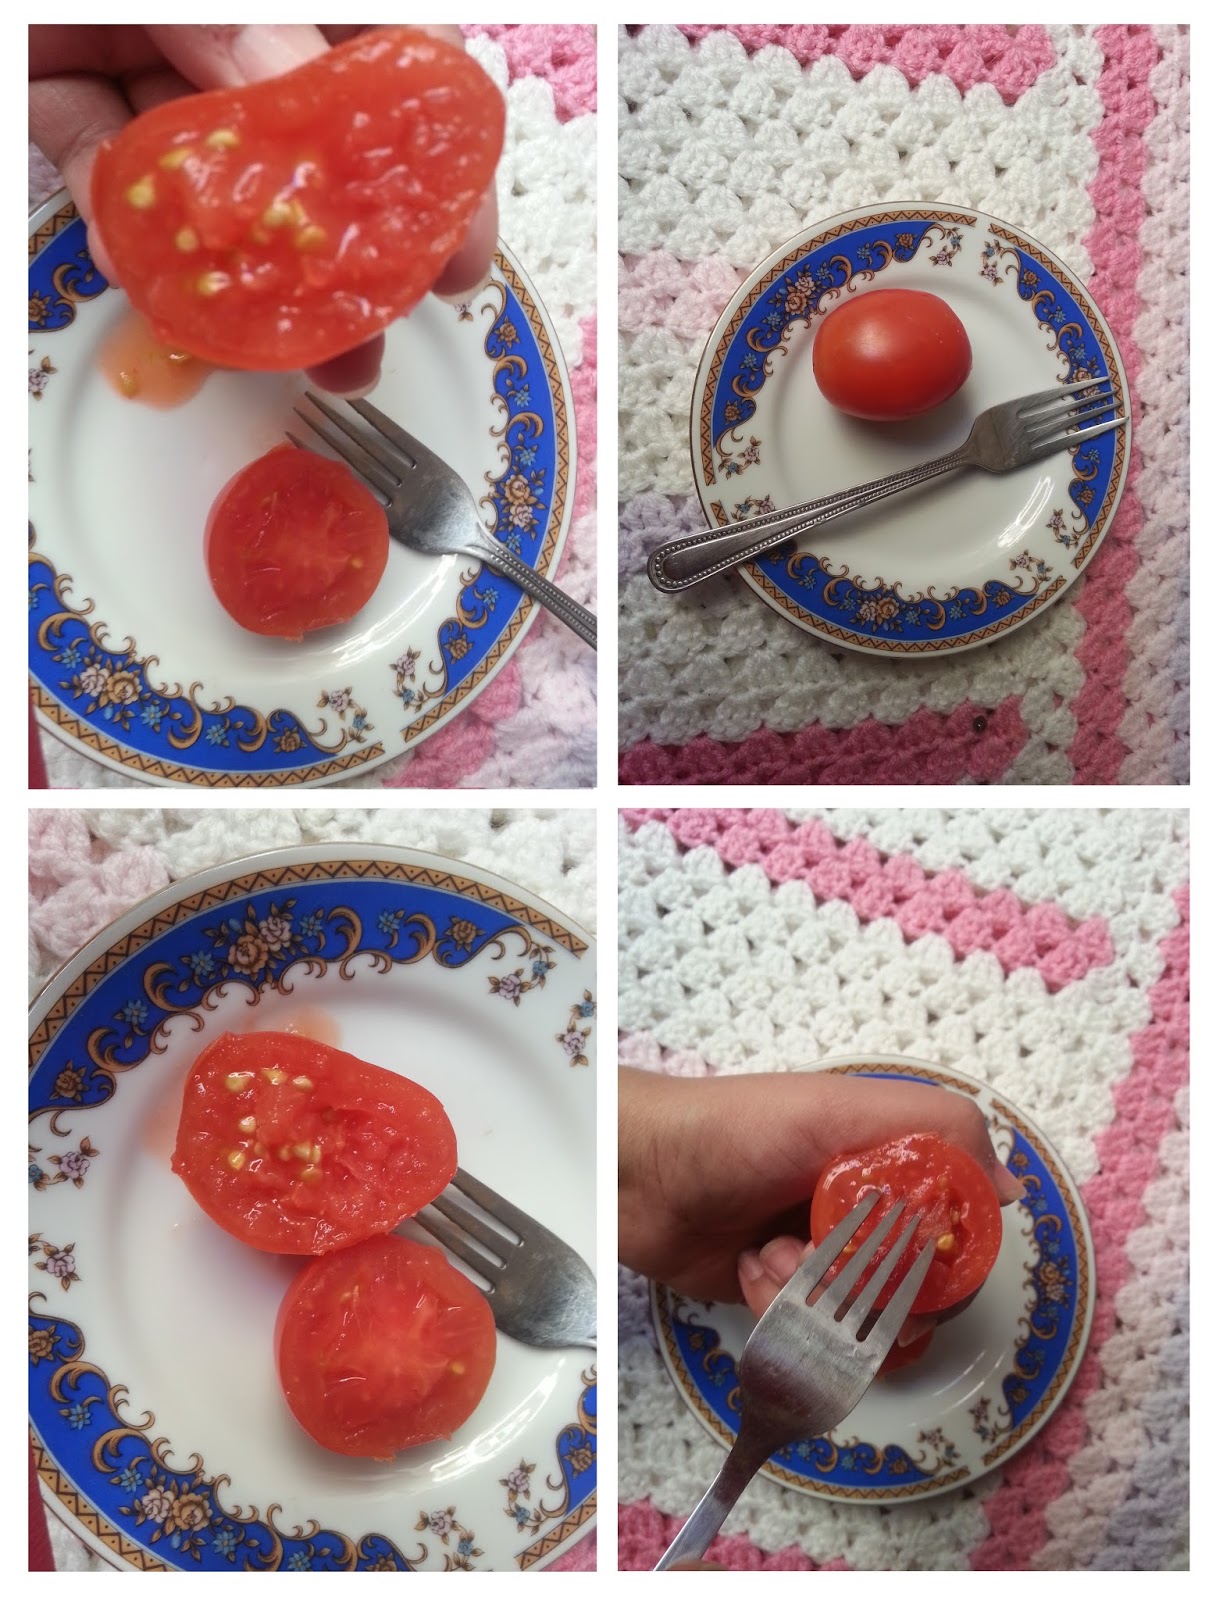 Tomato Juice Mask for combination skin type